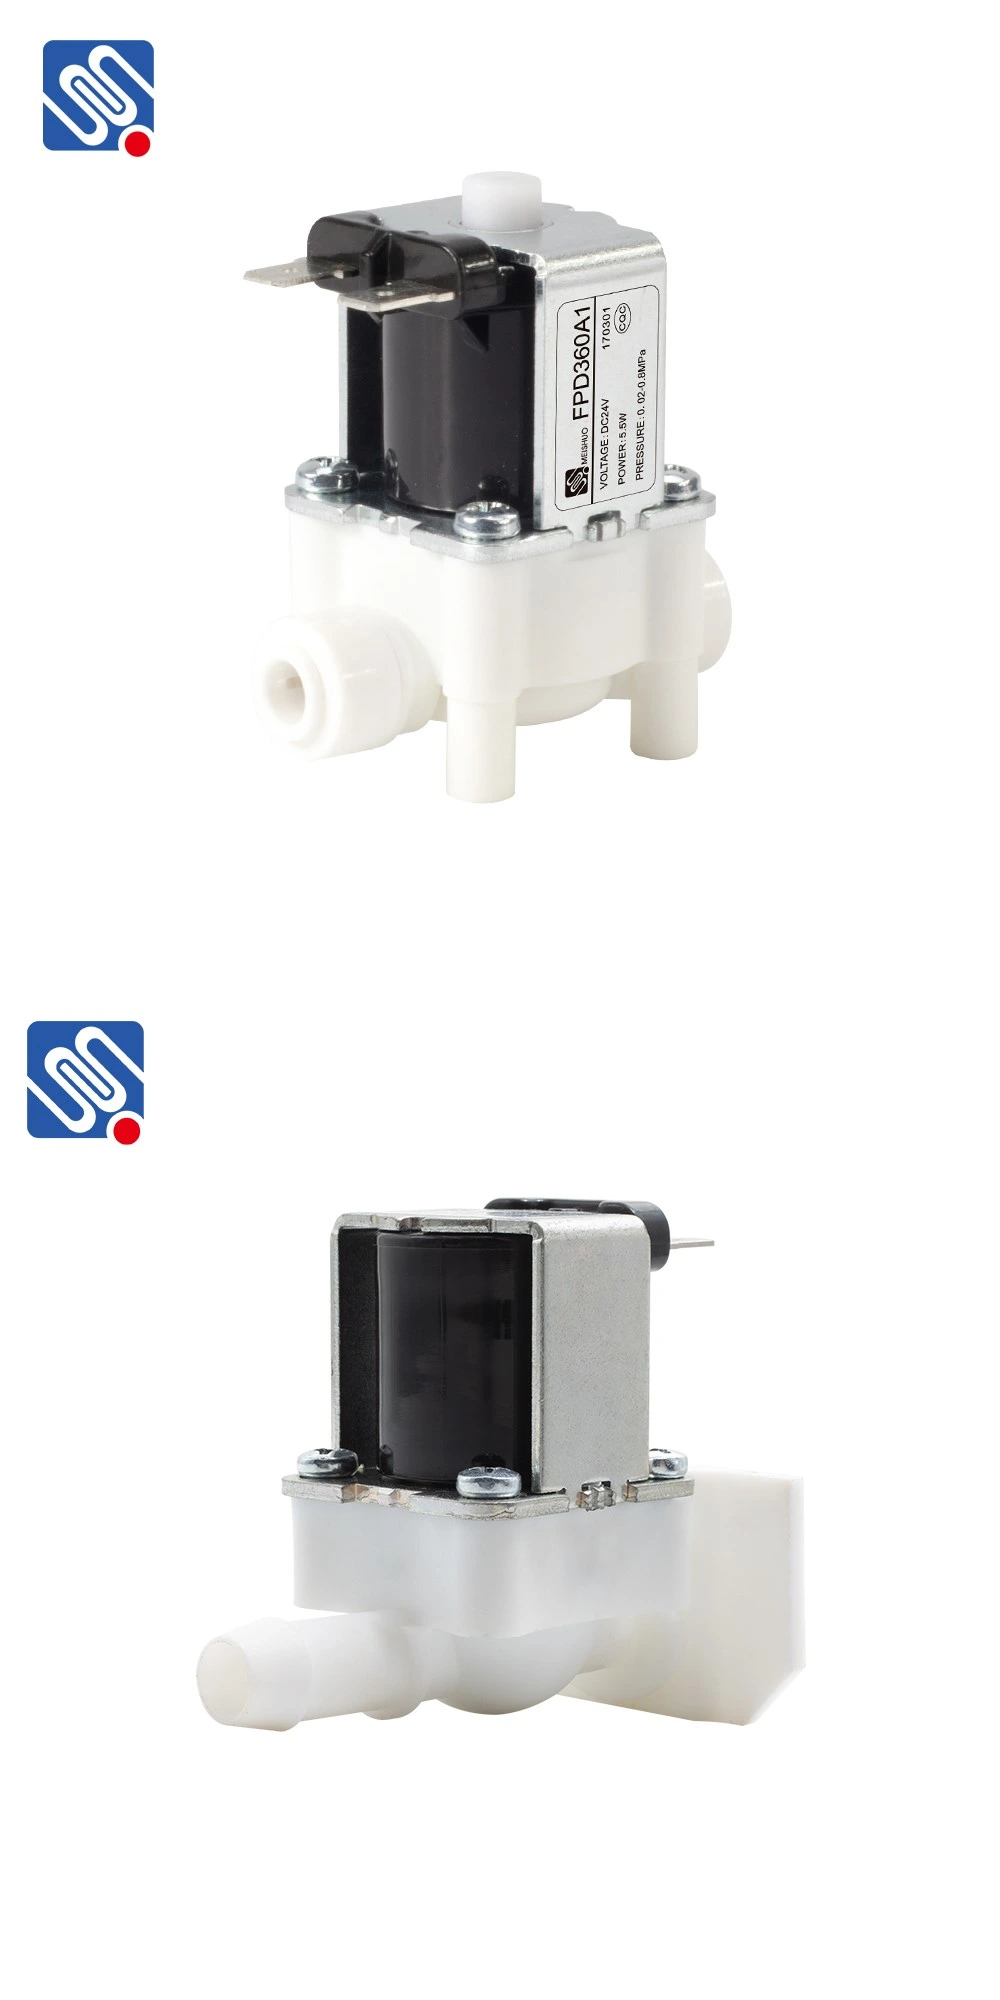 Normally Colse Solenoid Valve Meishuo Fpd360W 3/8'' Water Inlet Valve Plastic Valve Water Valve